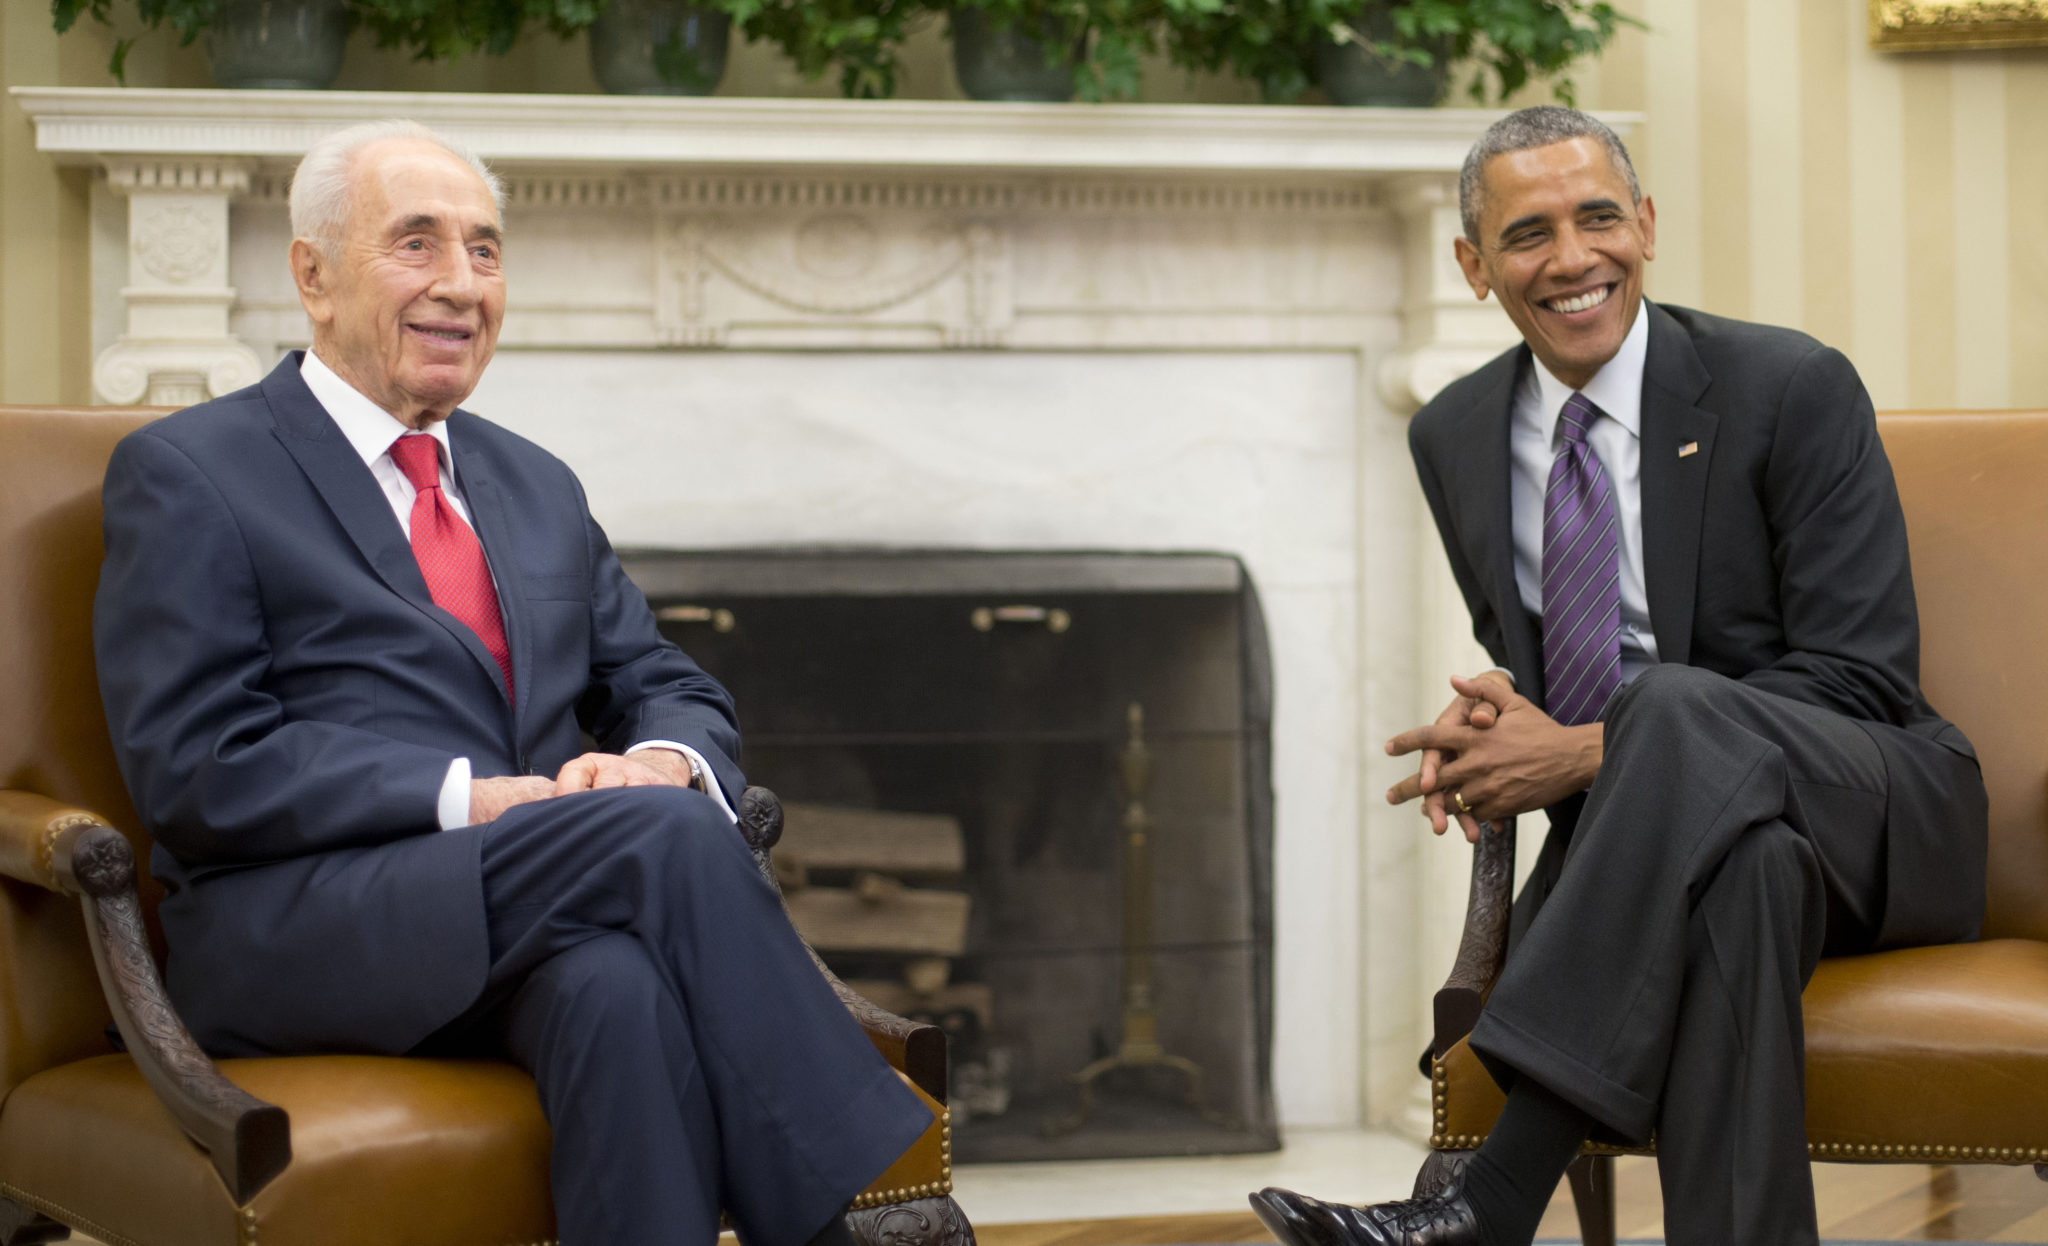 FILE - In this June 25, 2014, file photo, President Barack Obama, right, meets with Israeli President Shimon Peres in the Oval Office of the White House in Washington. Shimon Peres, a former Israeli president and prime minister, whose life story mirrored that of the Jewish state and who was celebrated around the world as a Nobel prize-winning visionary who pushed his country toward peace, has died, the Israeli news website YNet reported early Wednesday, Sept. 28, 2016. He was 93. (AP Photo/Pablo Martinez Monsivais, File)